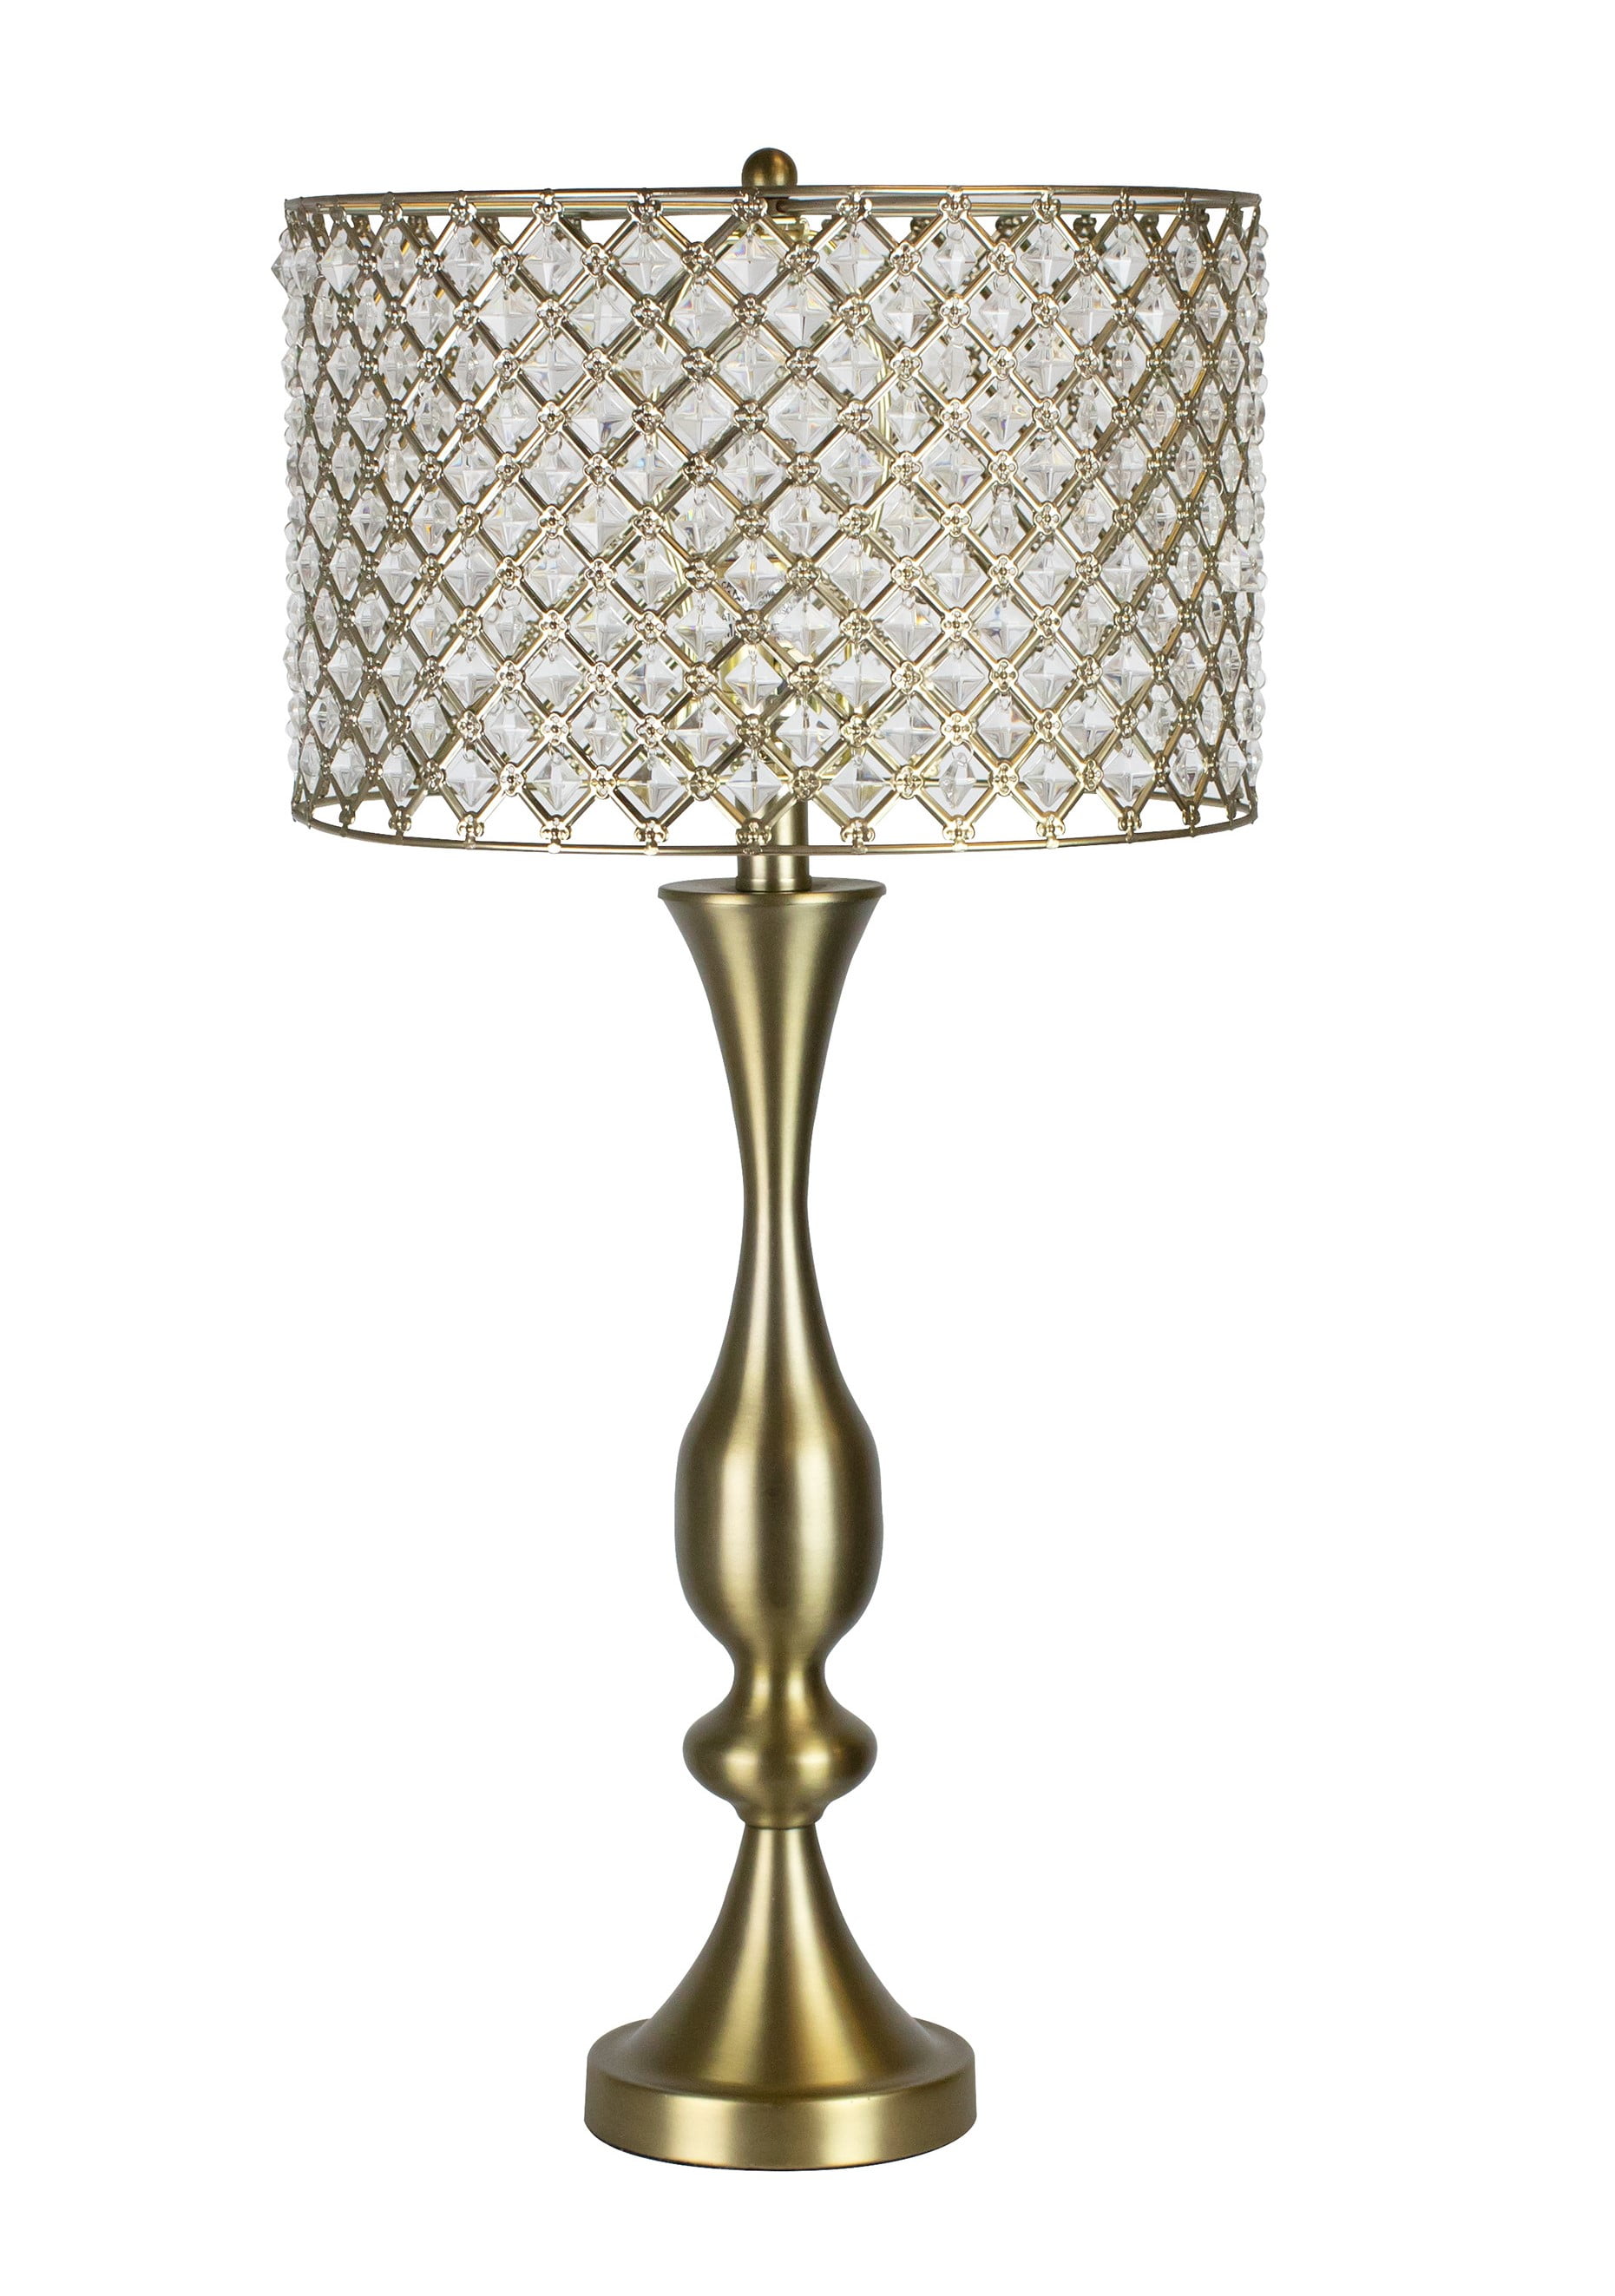 27 5 Plated Gold Table Lamp W Crystal Bling Shade Walmart Com